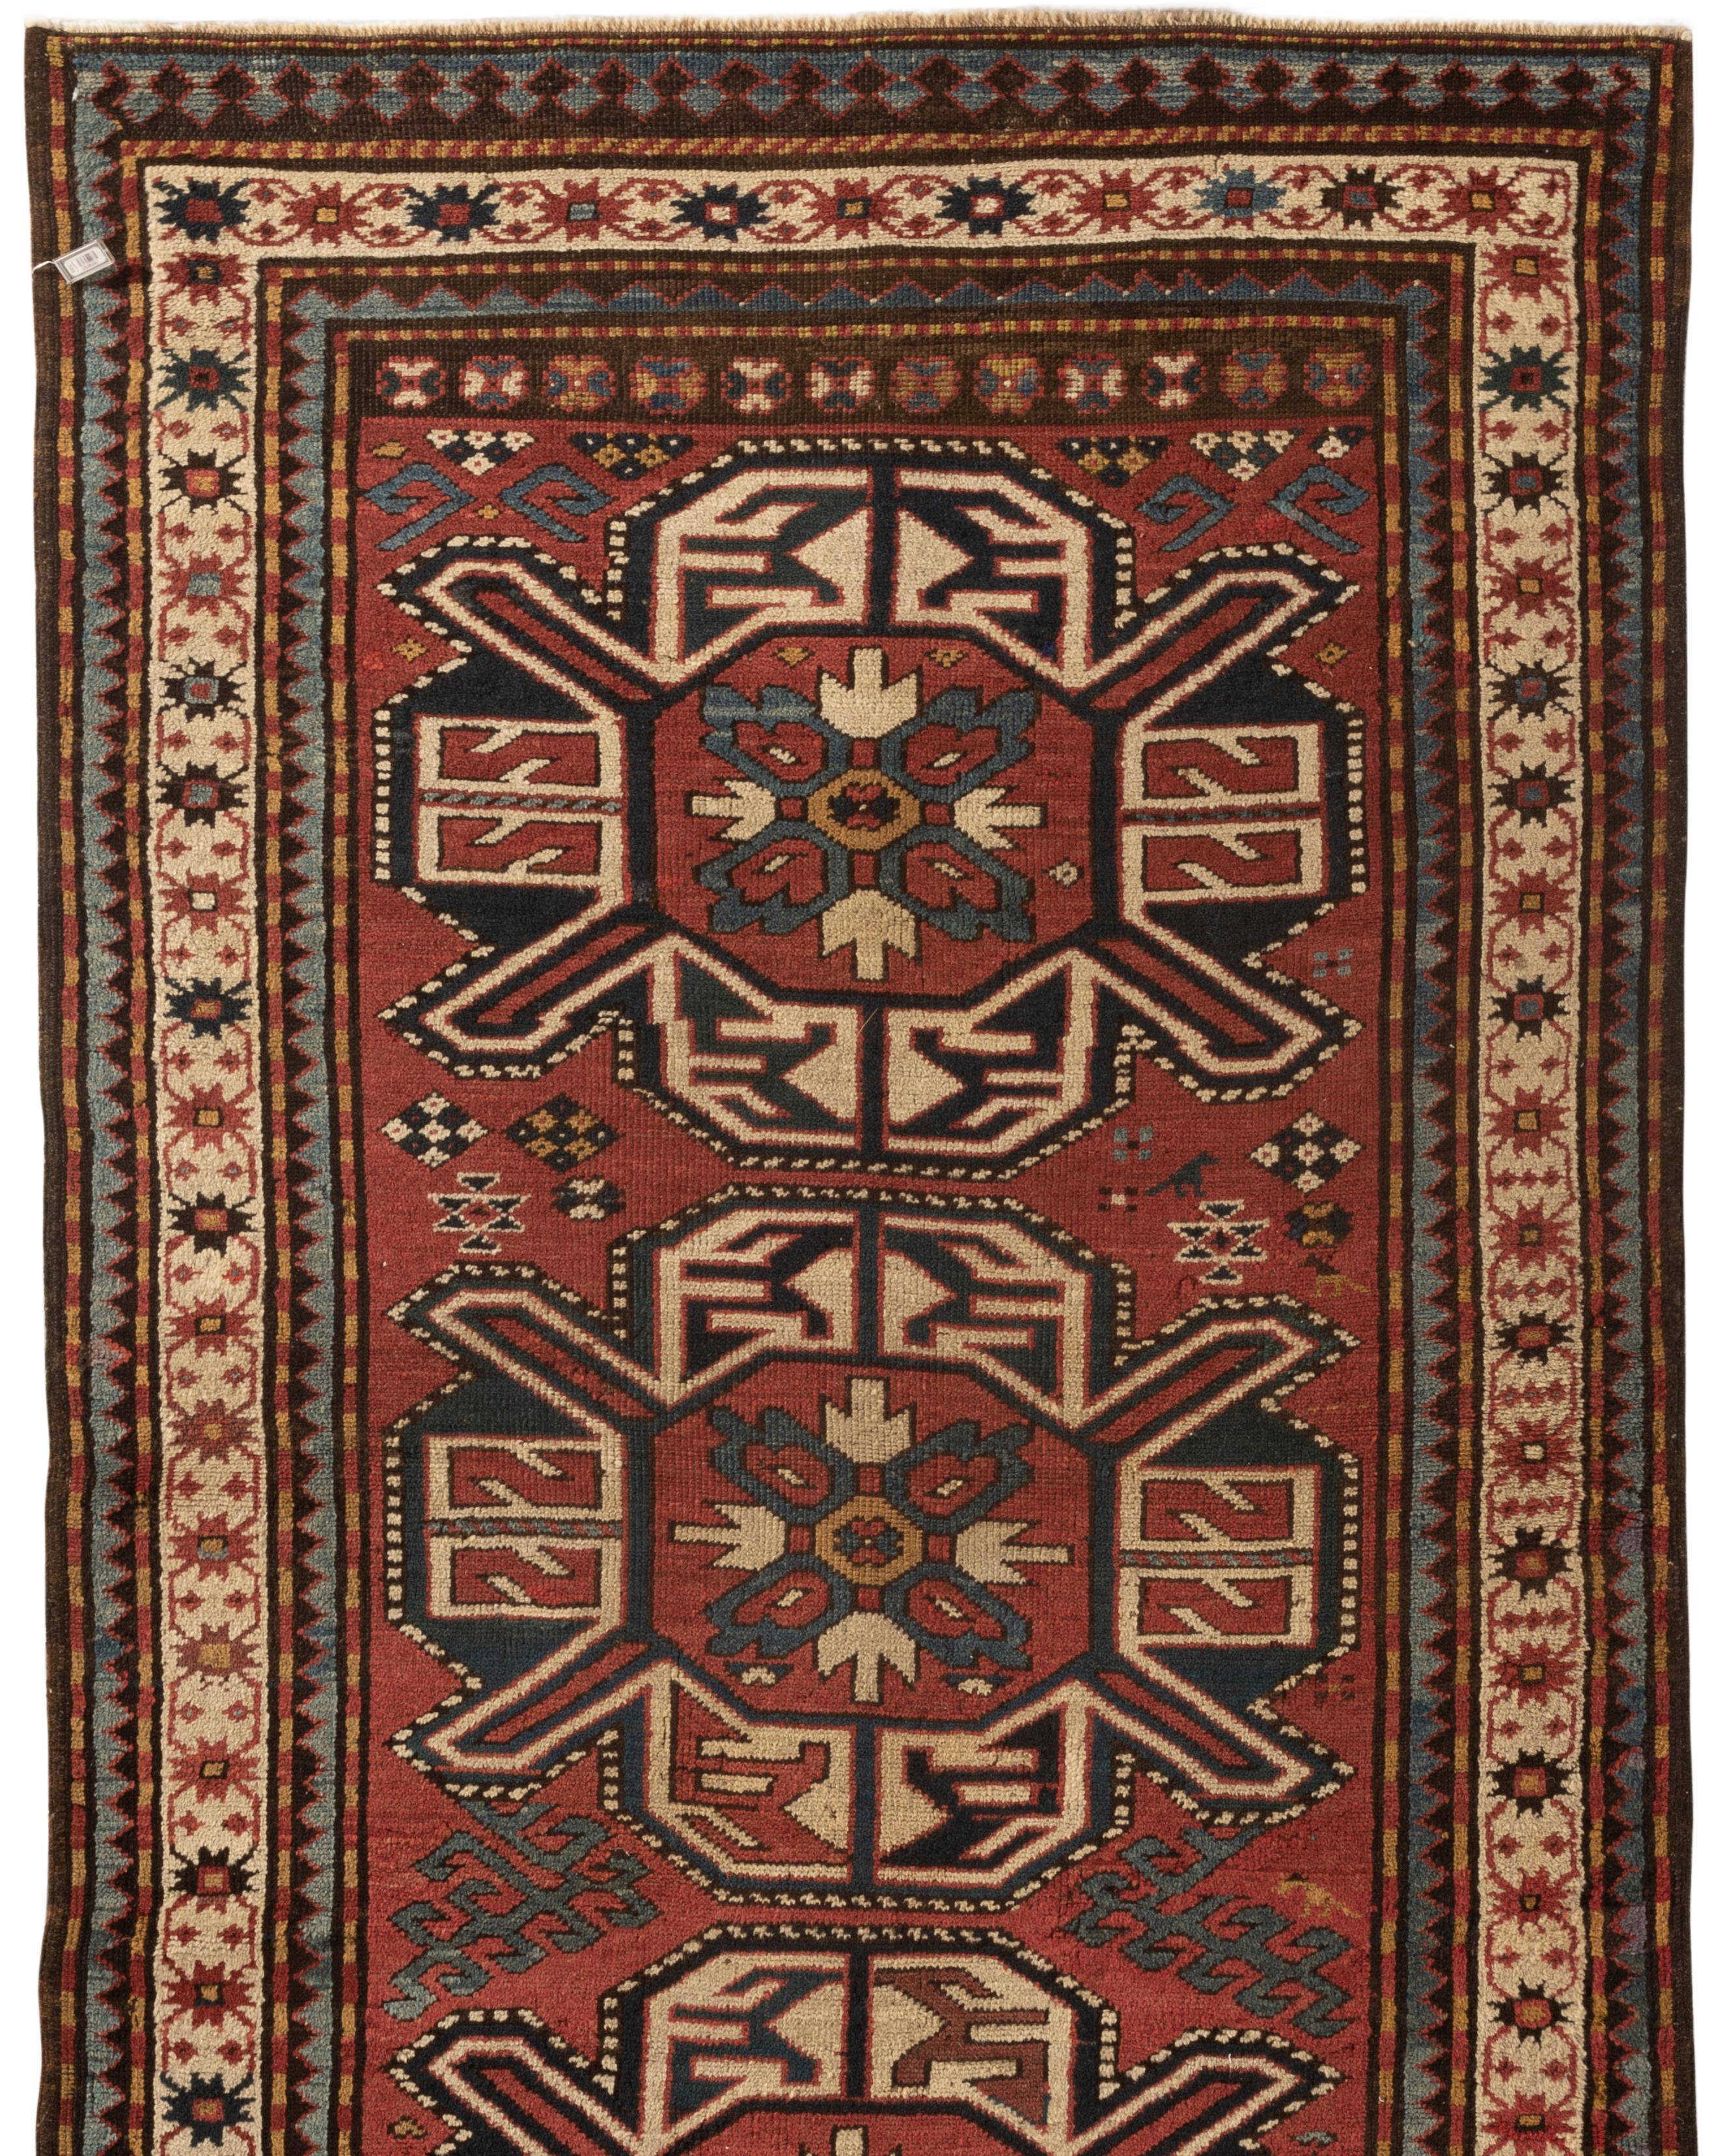 Antique Caucasian Kazak rug, circa 1880. A south west Caucasian Kazak handwoven rug the three central diamond shapes with floral and ethnic designs enclosed in an ivory border full of floriated designs and then enclosed within guard borders in soft